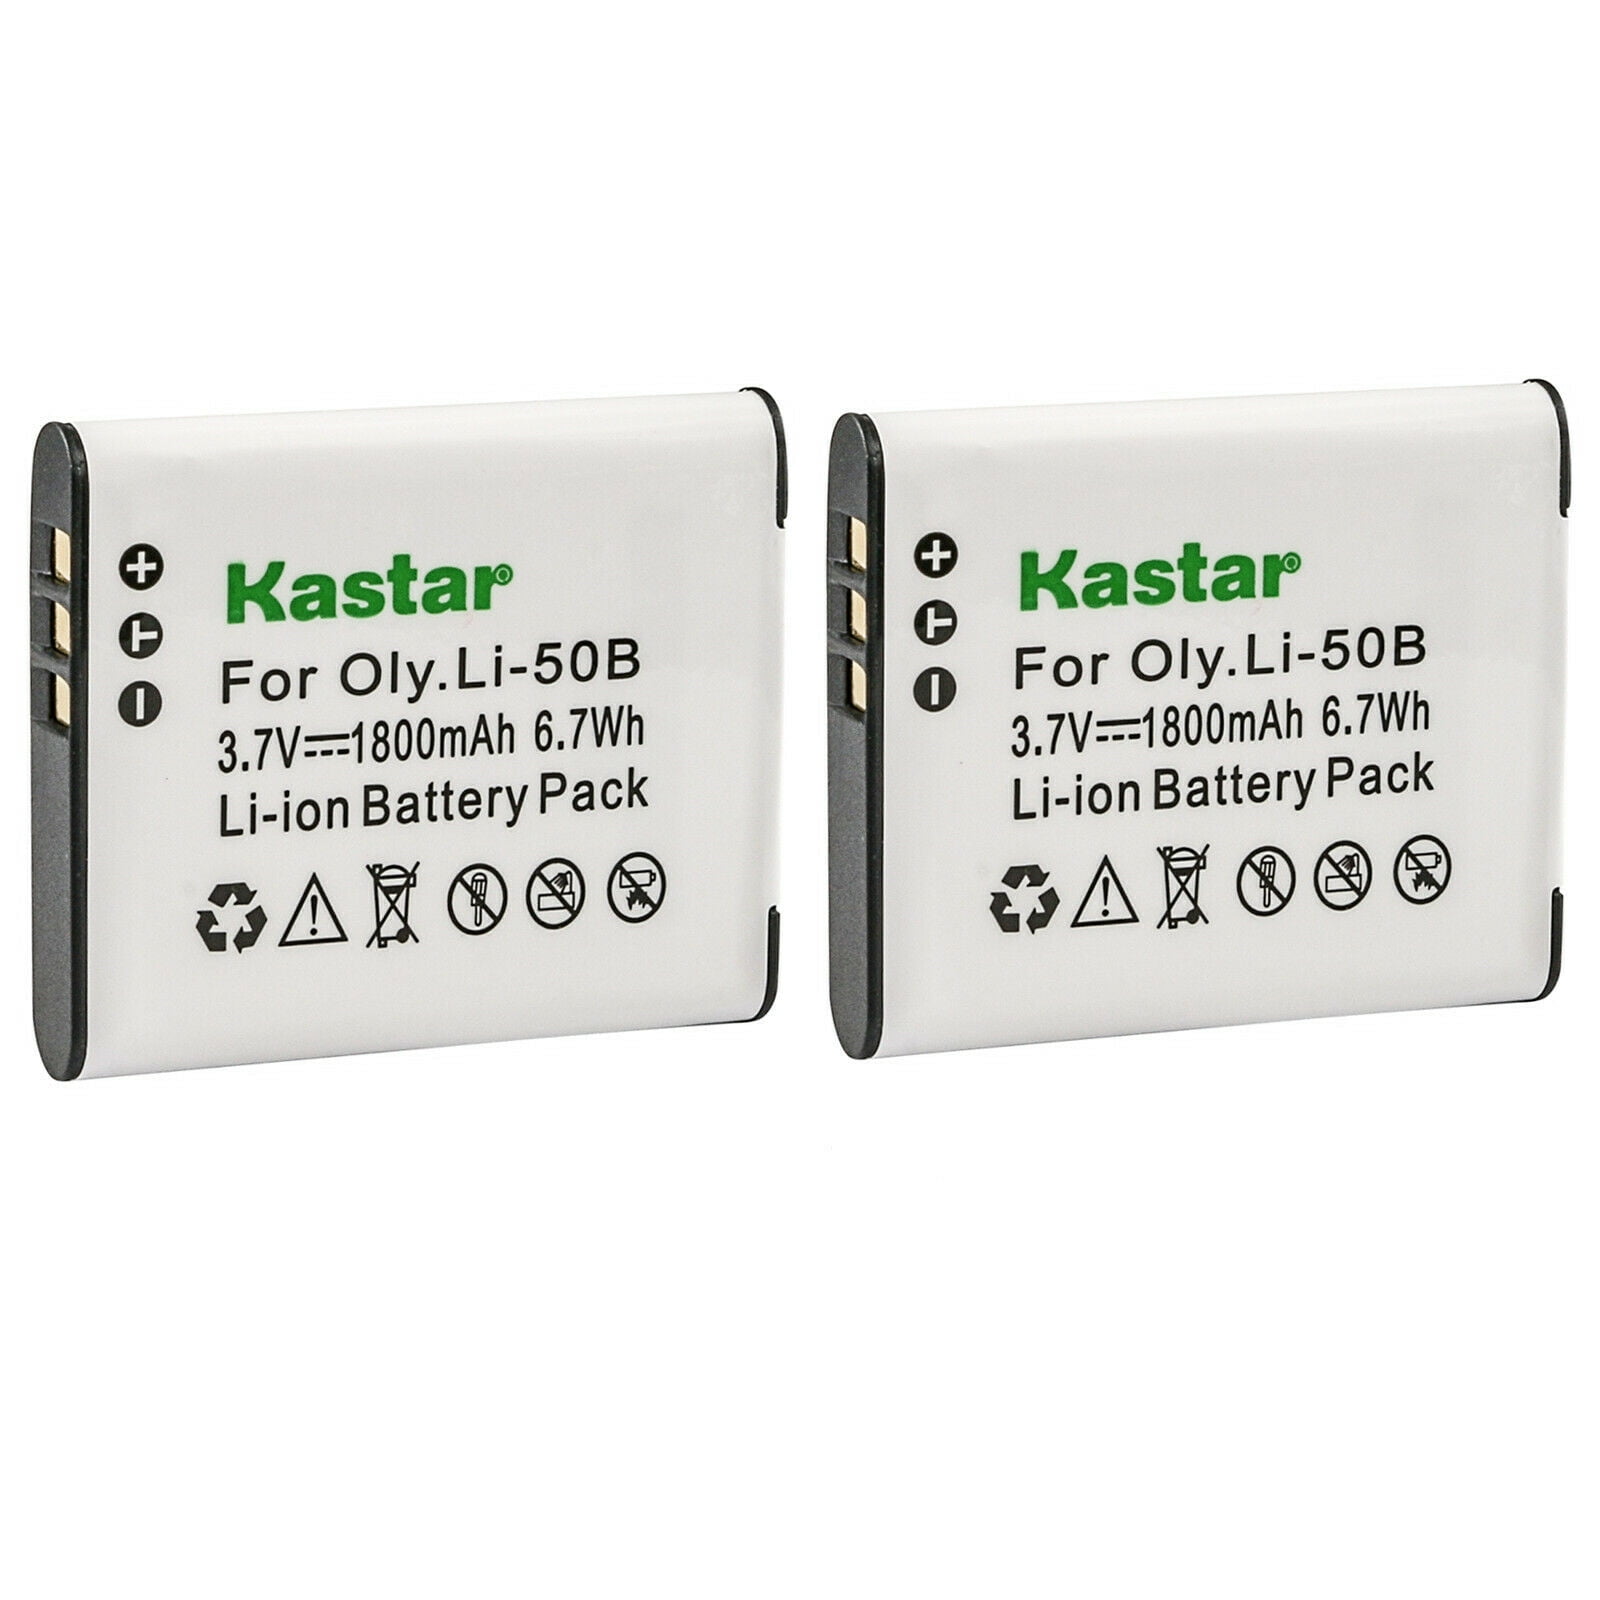 micro Vooraf Observeer Kastar 2-Pack Battery Replacement for Casio Exilim EX-TR350s, Exilim  EX-TR50, Exilim EX-TR50GD, Exilim EX-TR50RD, Exilim EX-TR50VT, Exilim EX- TR500, Exilim EX-TR550, Exilim EX-TR60, Exilim EX-TR600 - Walmart.com